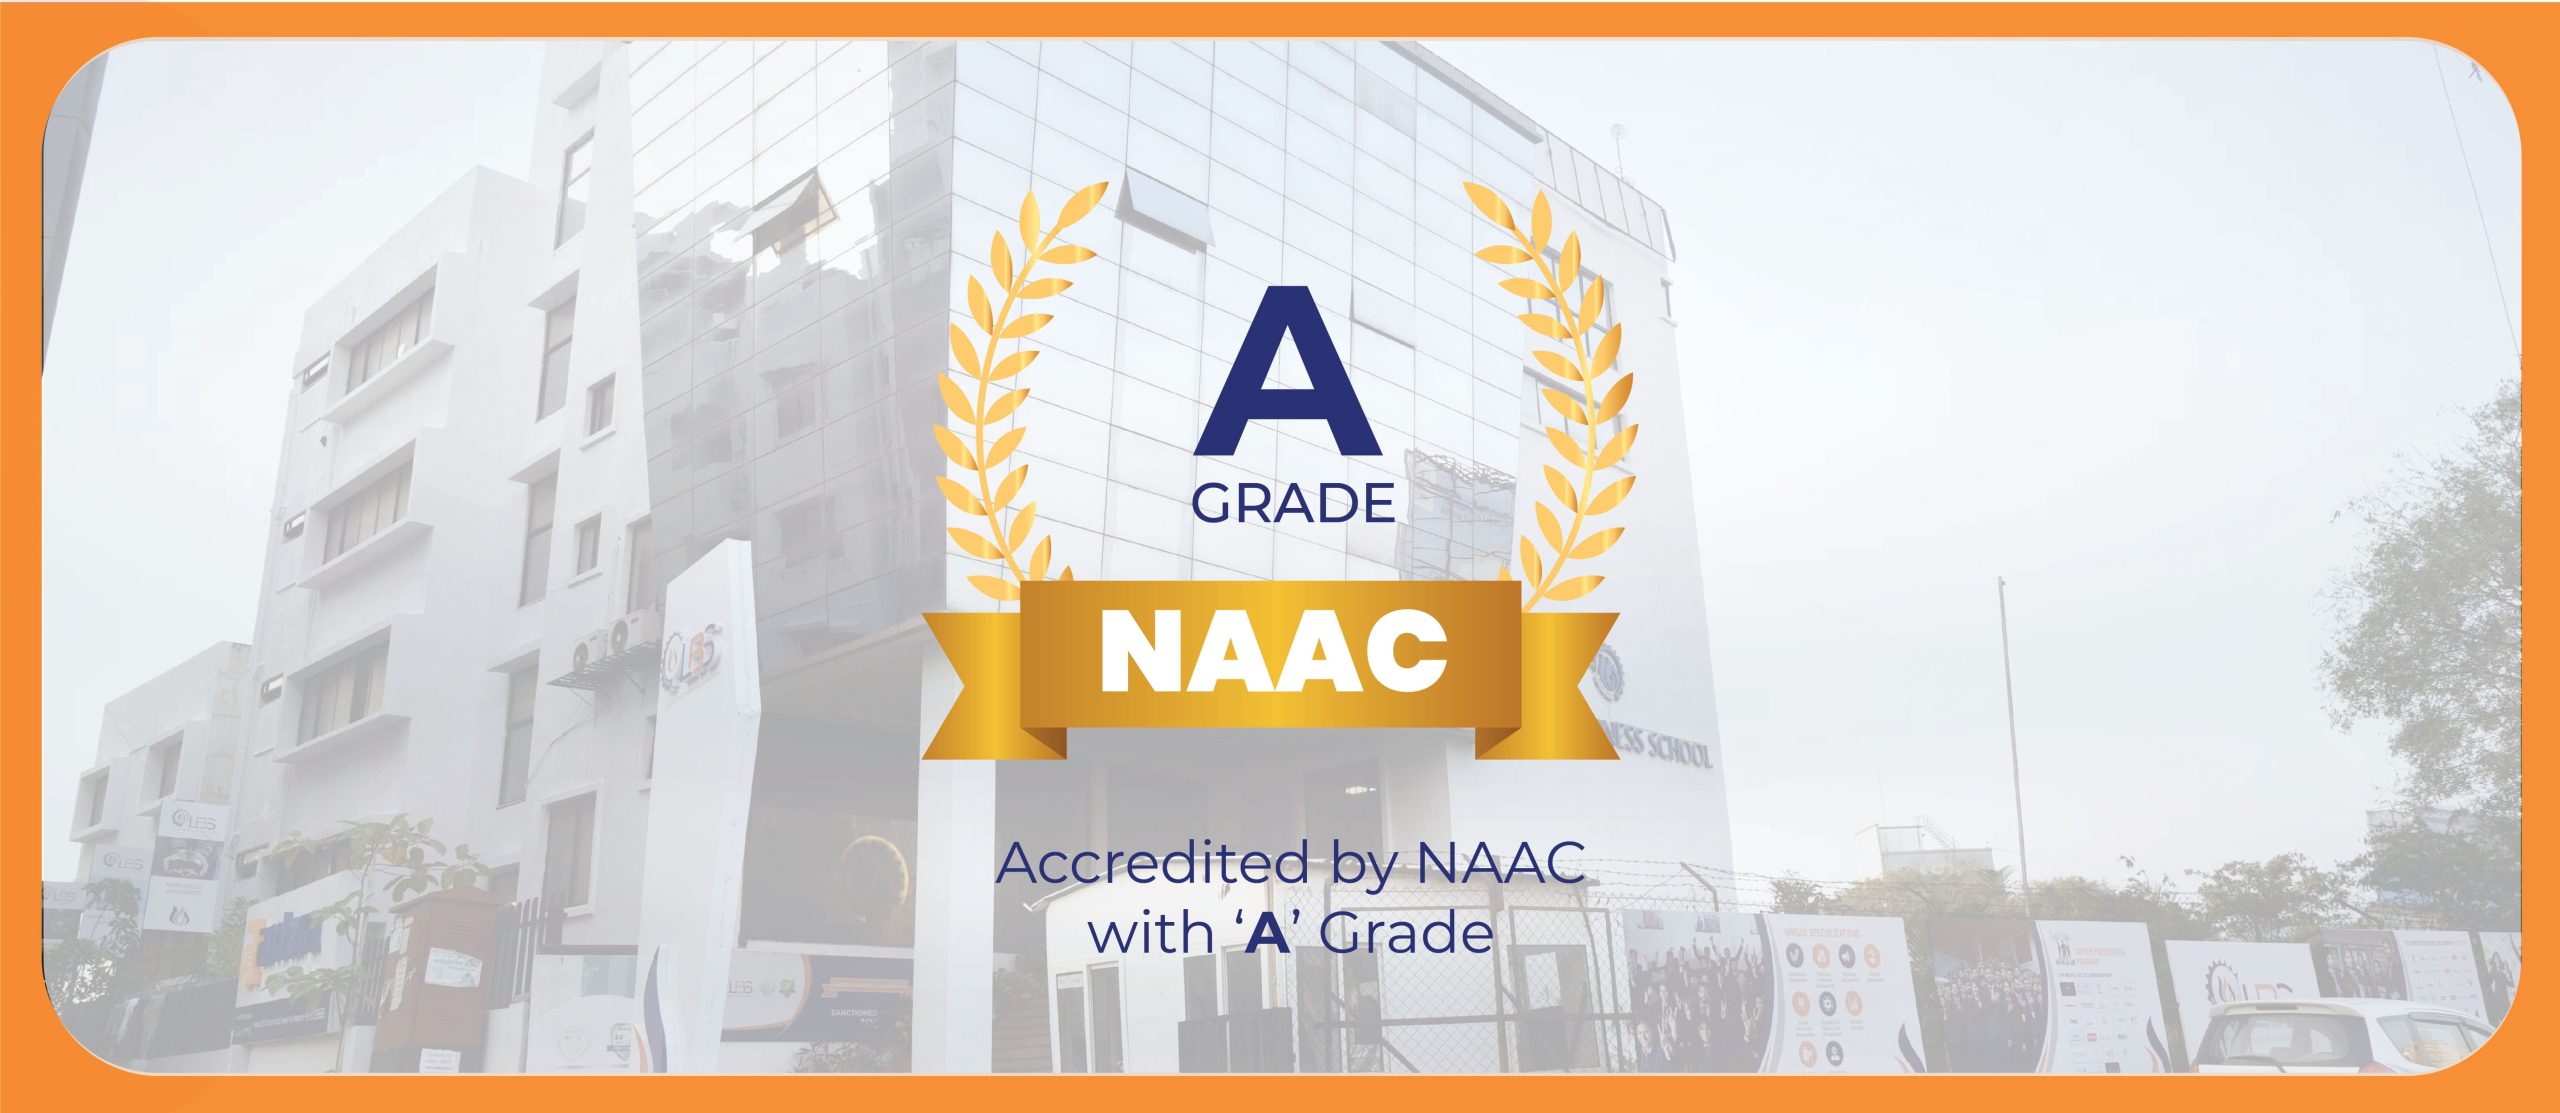 LBS Accredited by NAAC